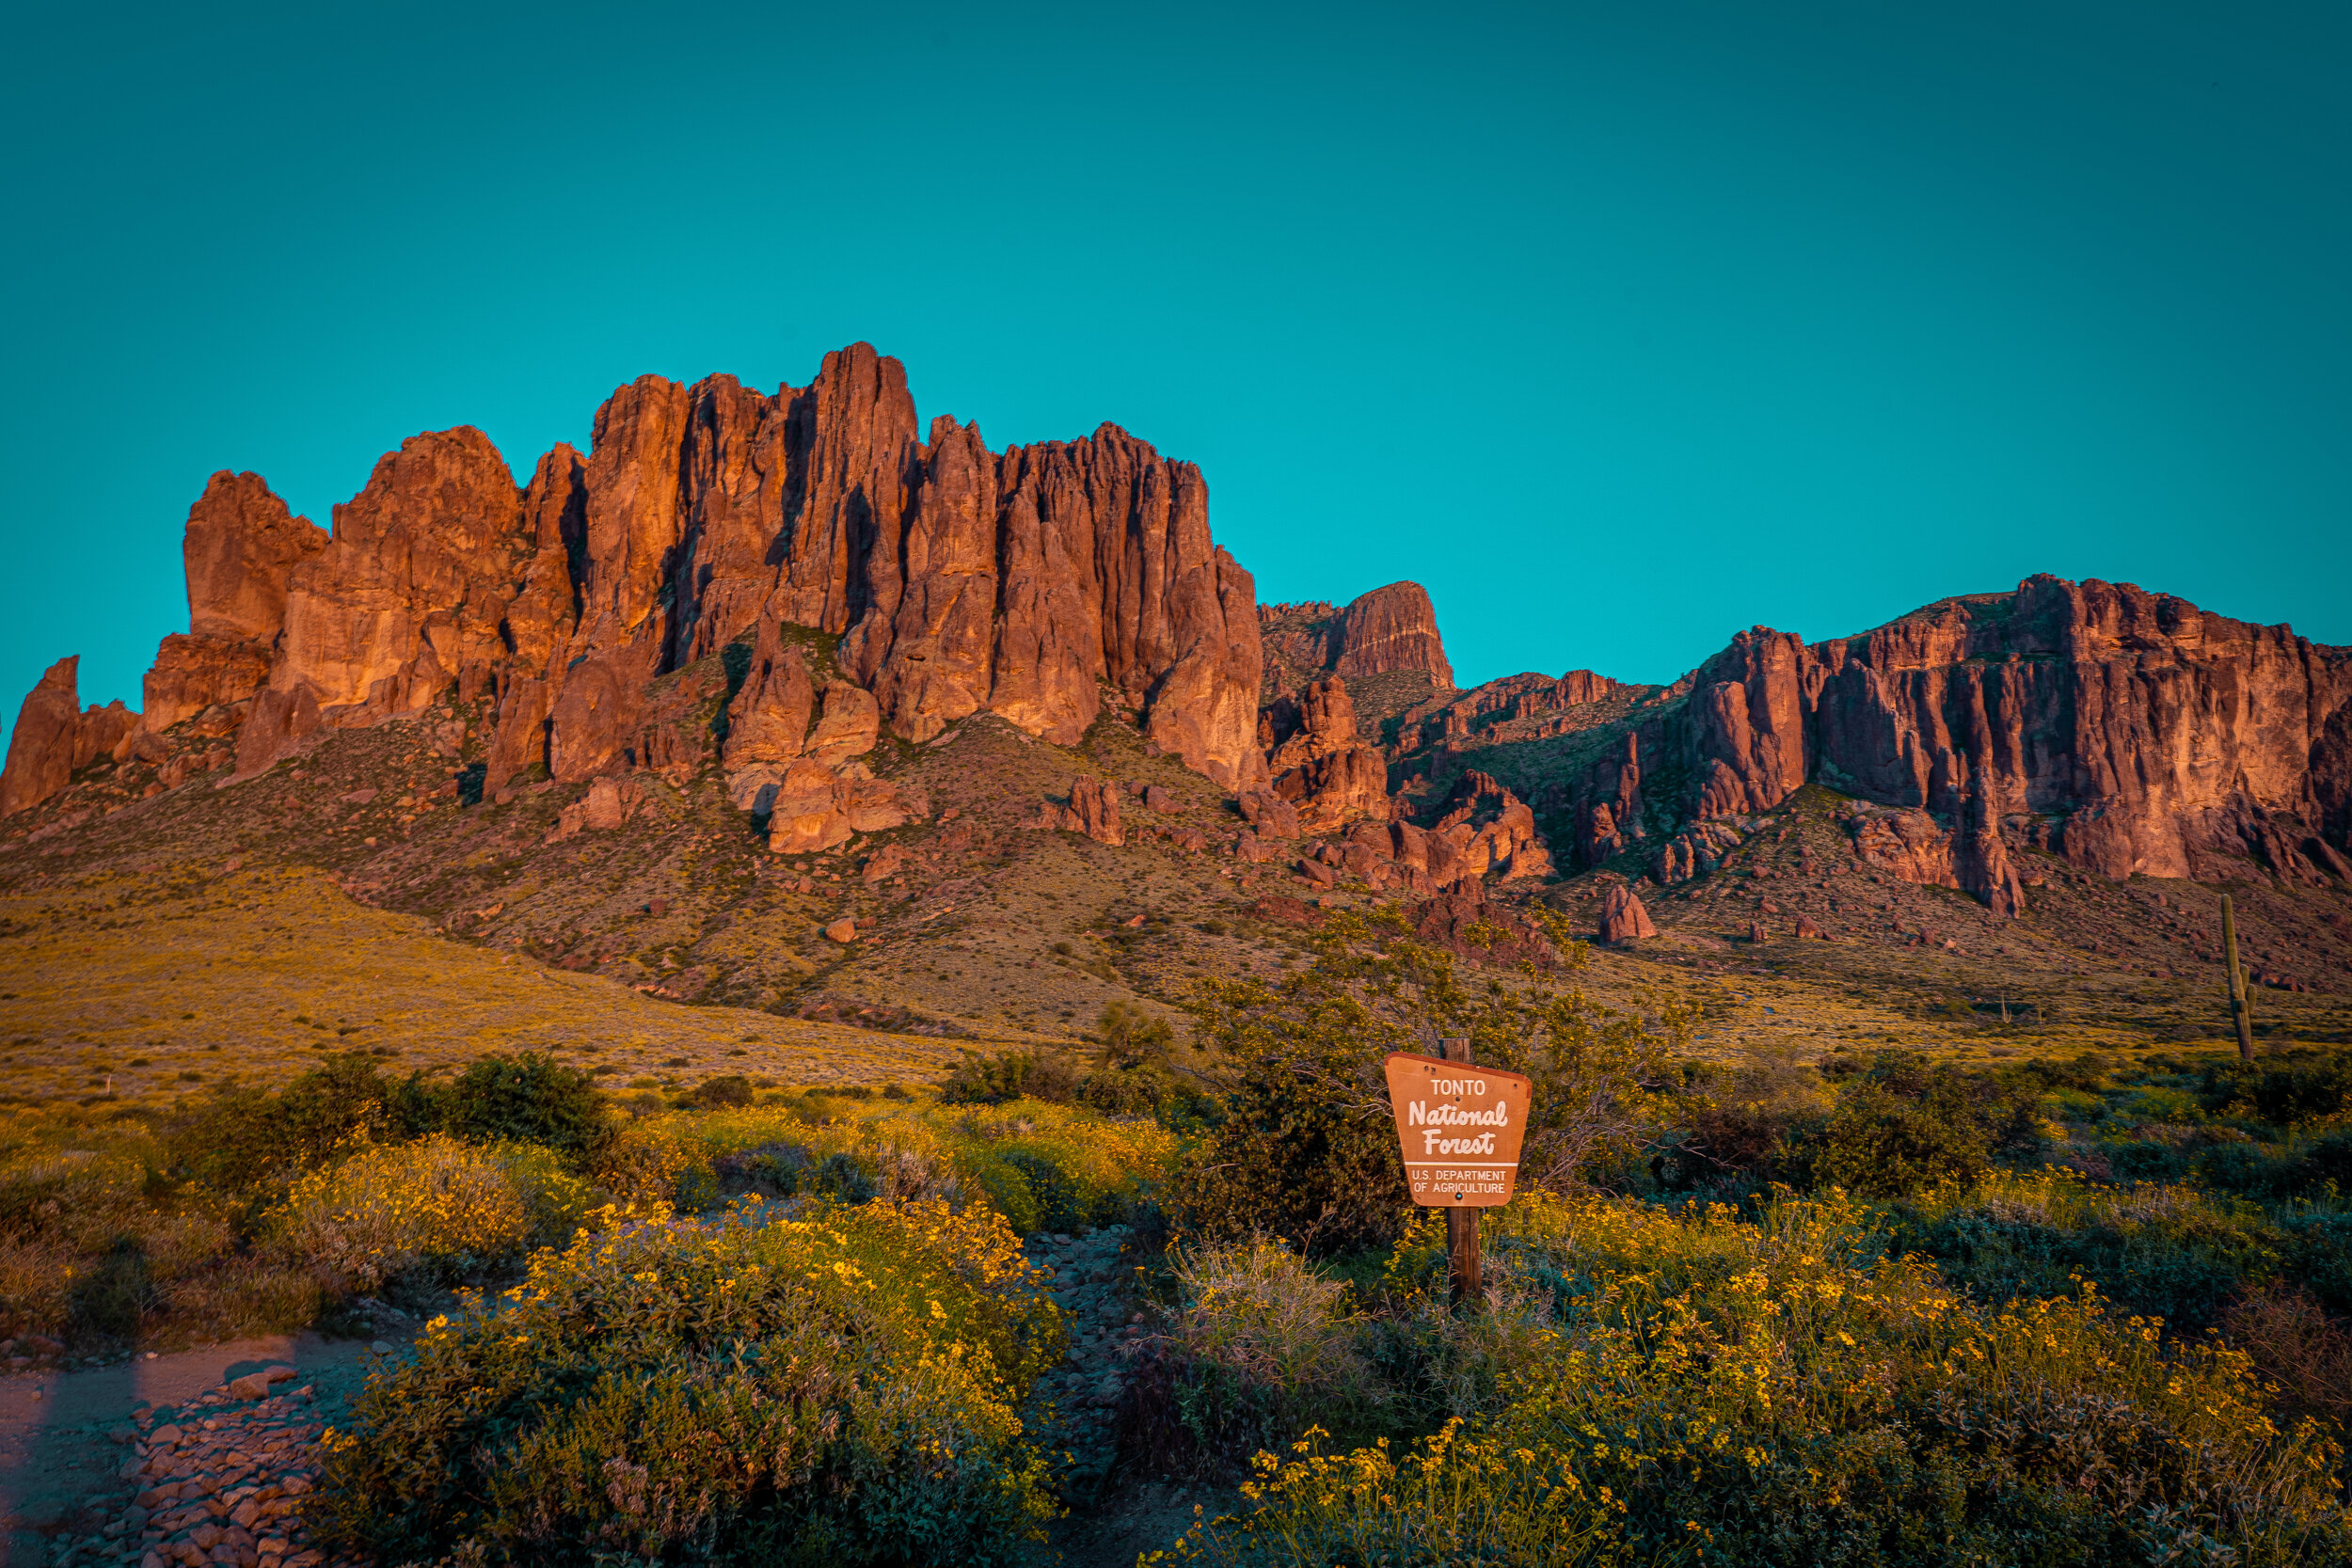  The sunset illuminating the mountains in Tonto National Forest in the Senoran Desert.  